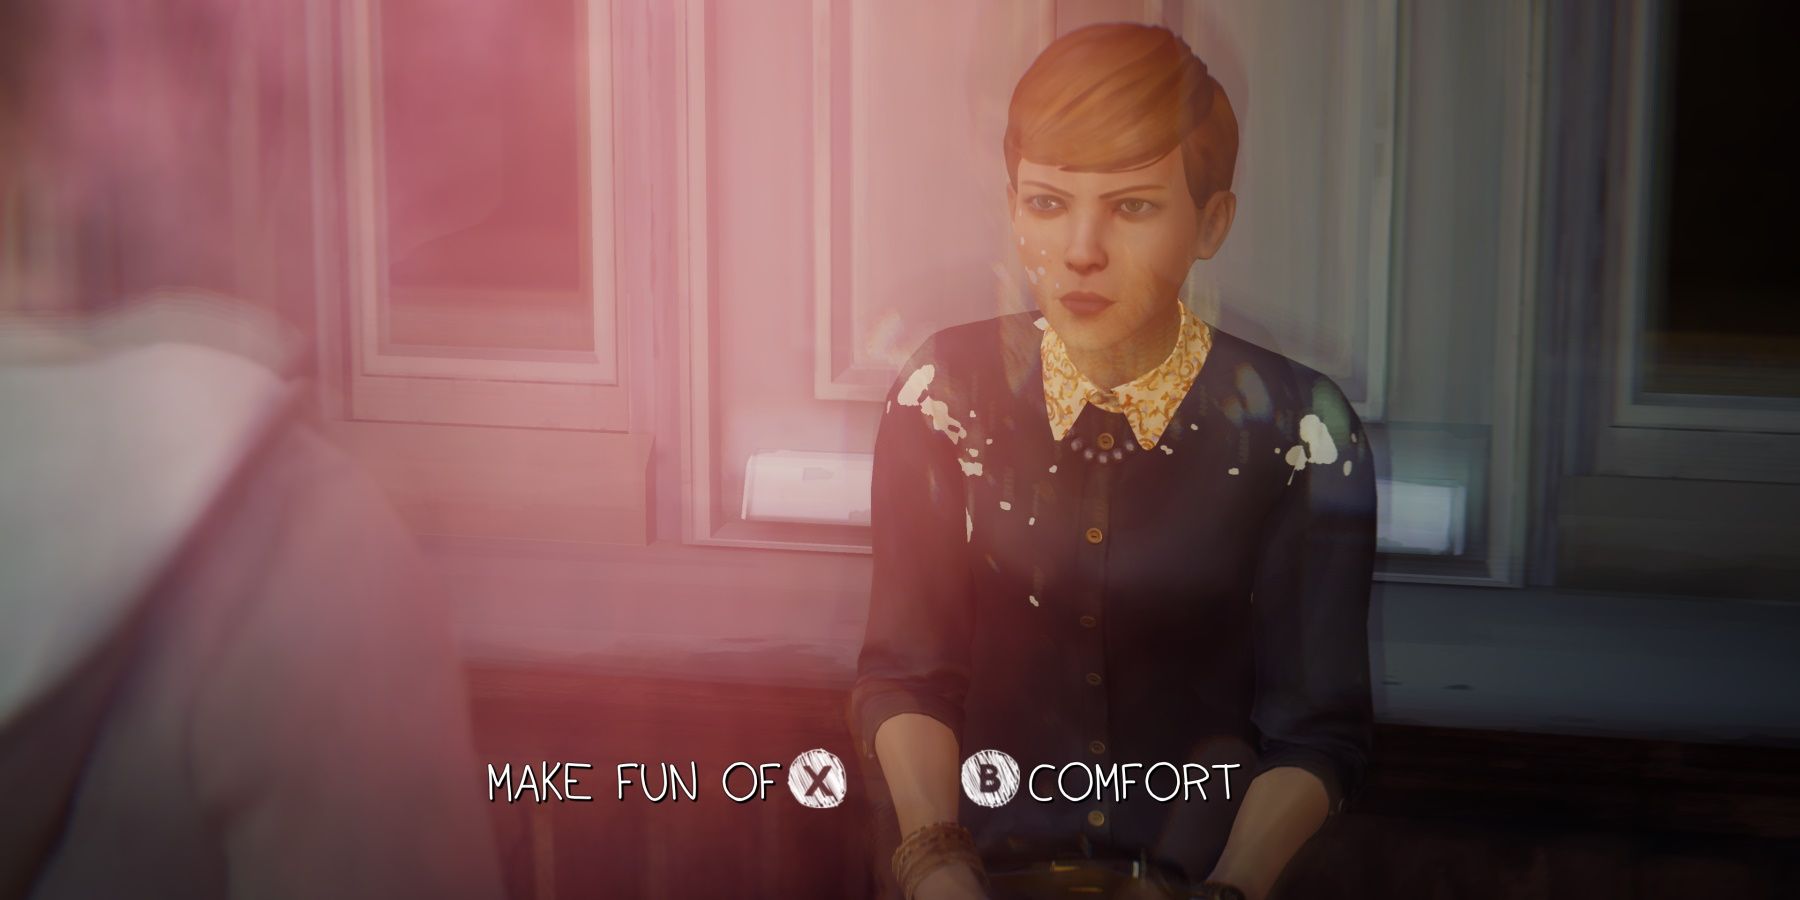 Life is Strange Max deciding whether to comfort or make fun of Victoria in Episode 1